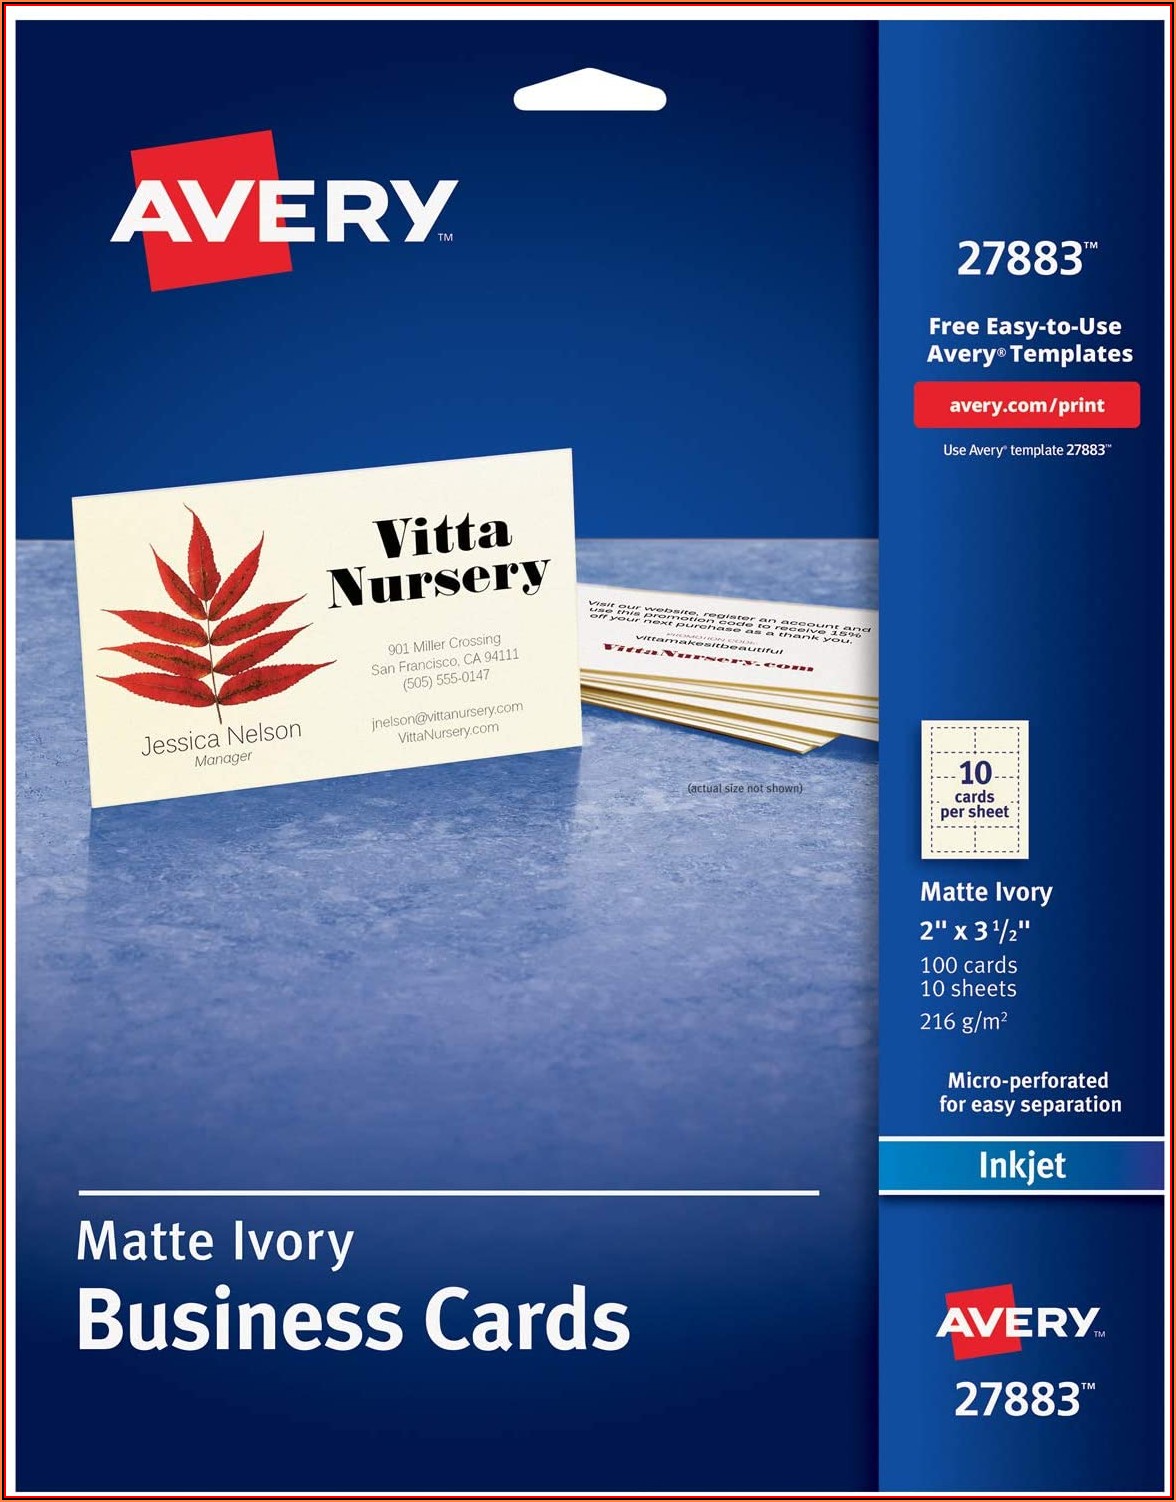 avery-templates-8876-business-cards-template-1-resume-examples